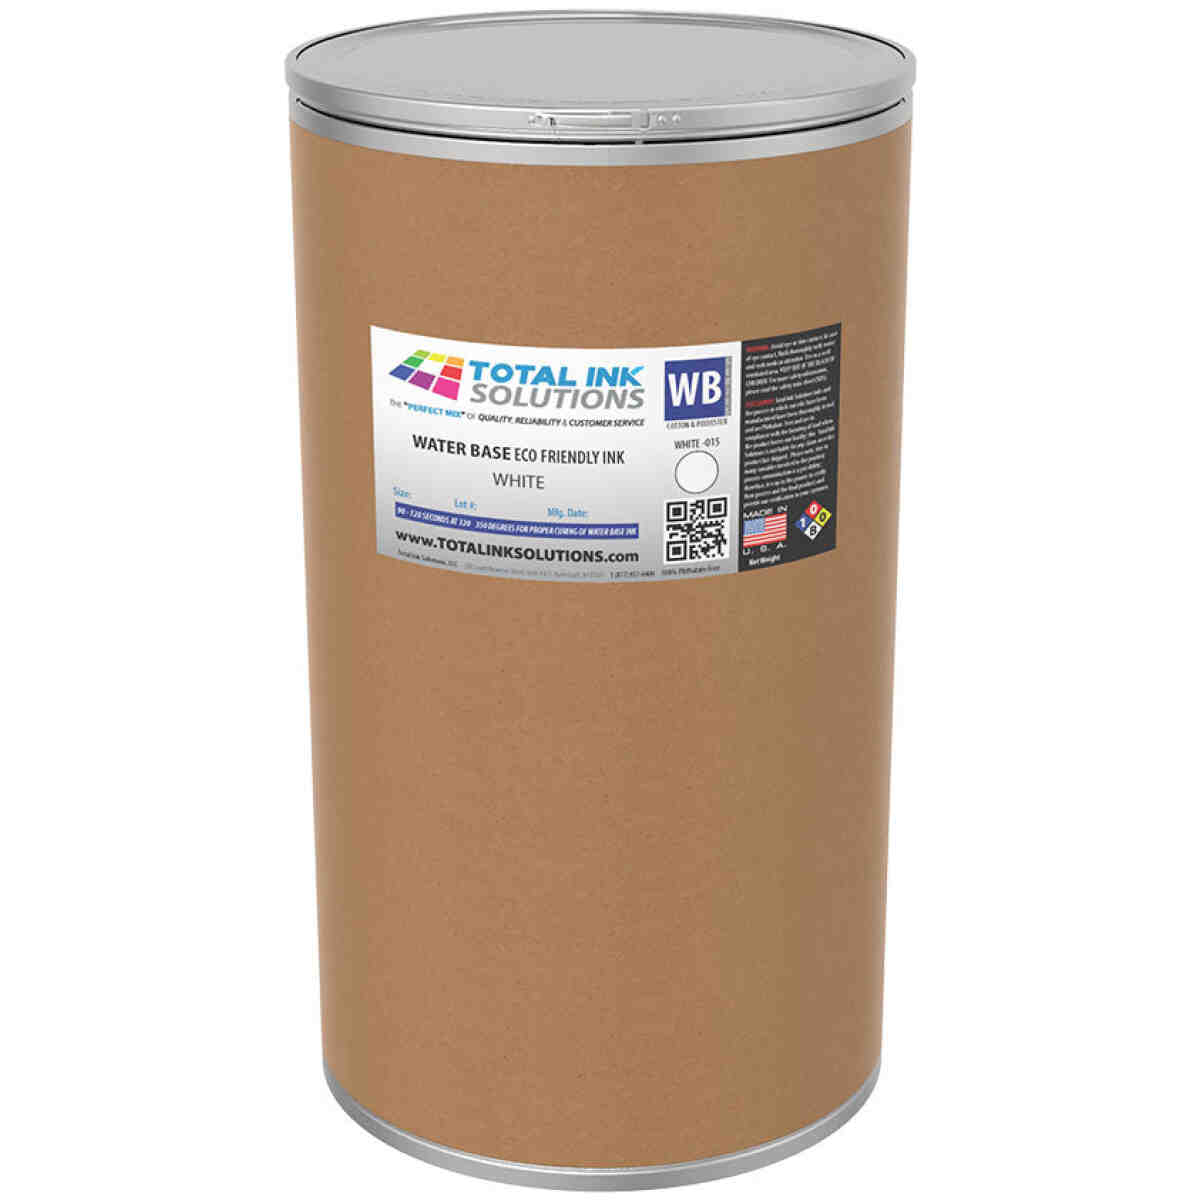 Waterbase Textile Ink - White - 55 Gallons TOTAL INK SOLUTIONS®